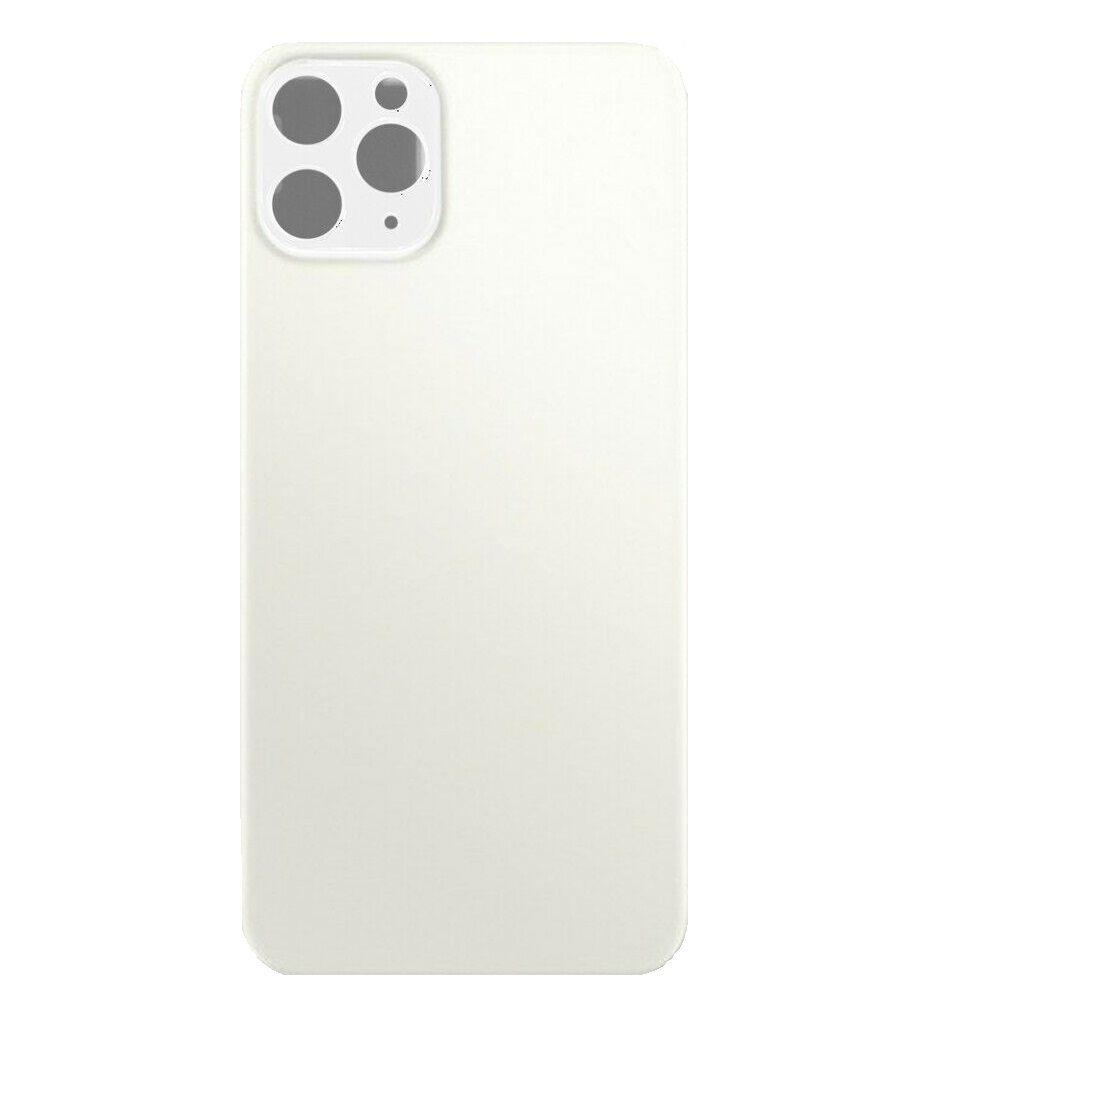 IPHONE 11 PRO WHITE FLIP WITHOUT CAMERA GLASS